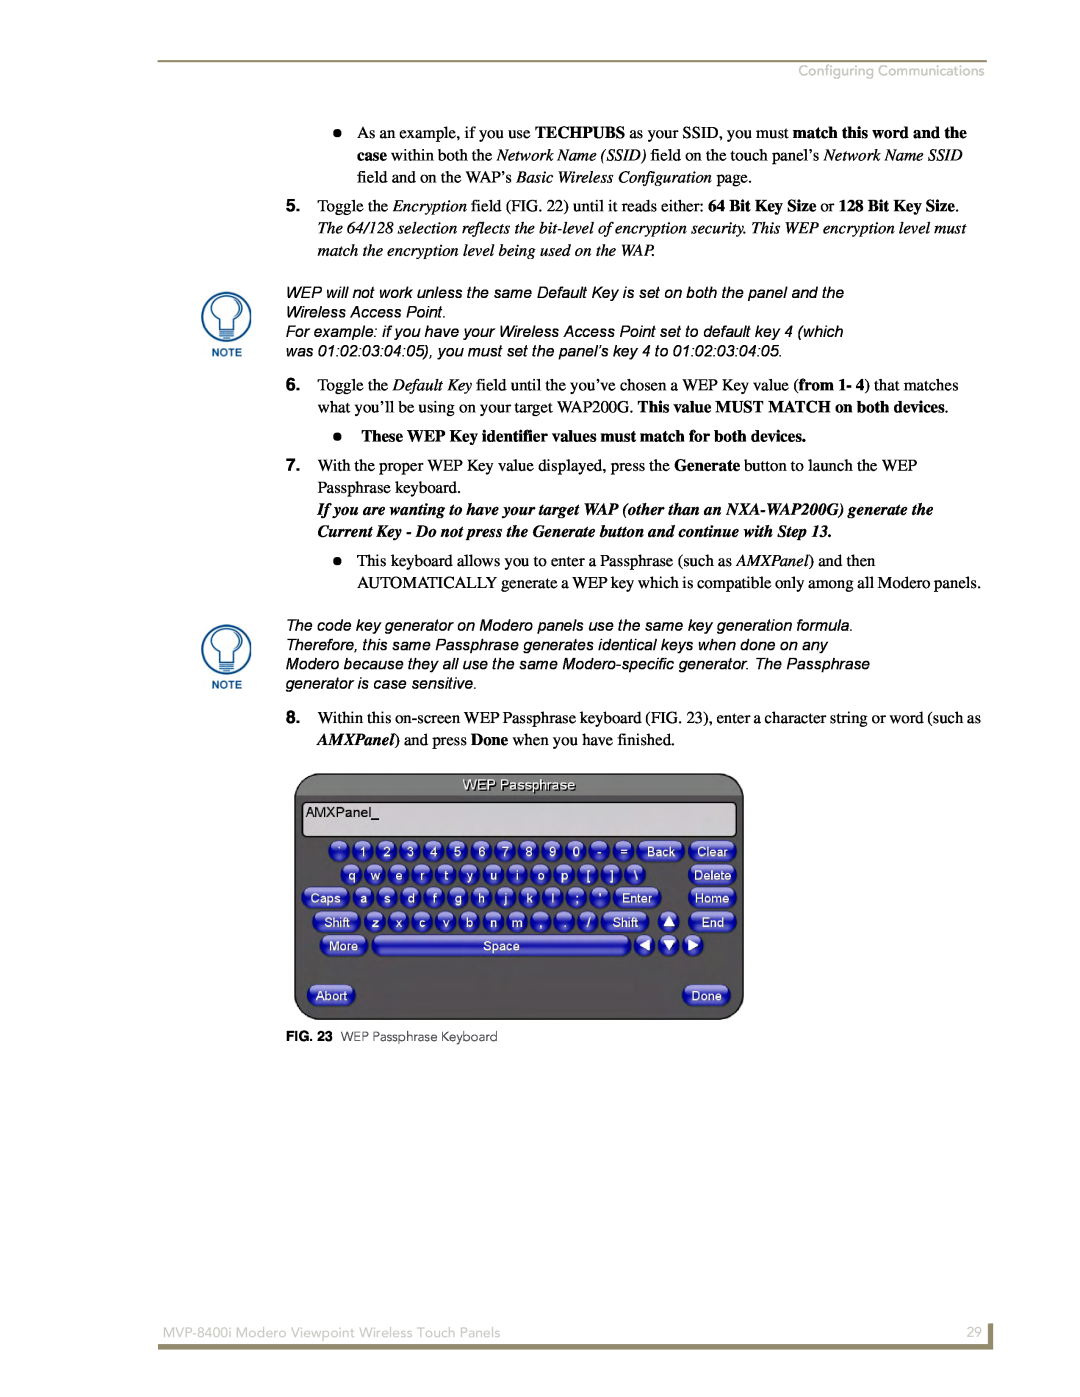 AMX MVP-8400i manual These WEP Key identifier values must match for both devices, WEP Passphrase Keyboard 